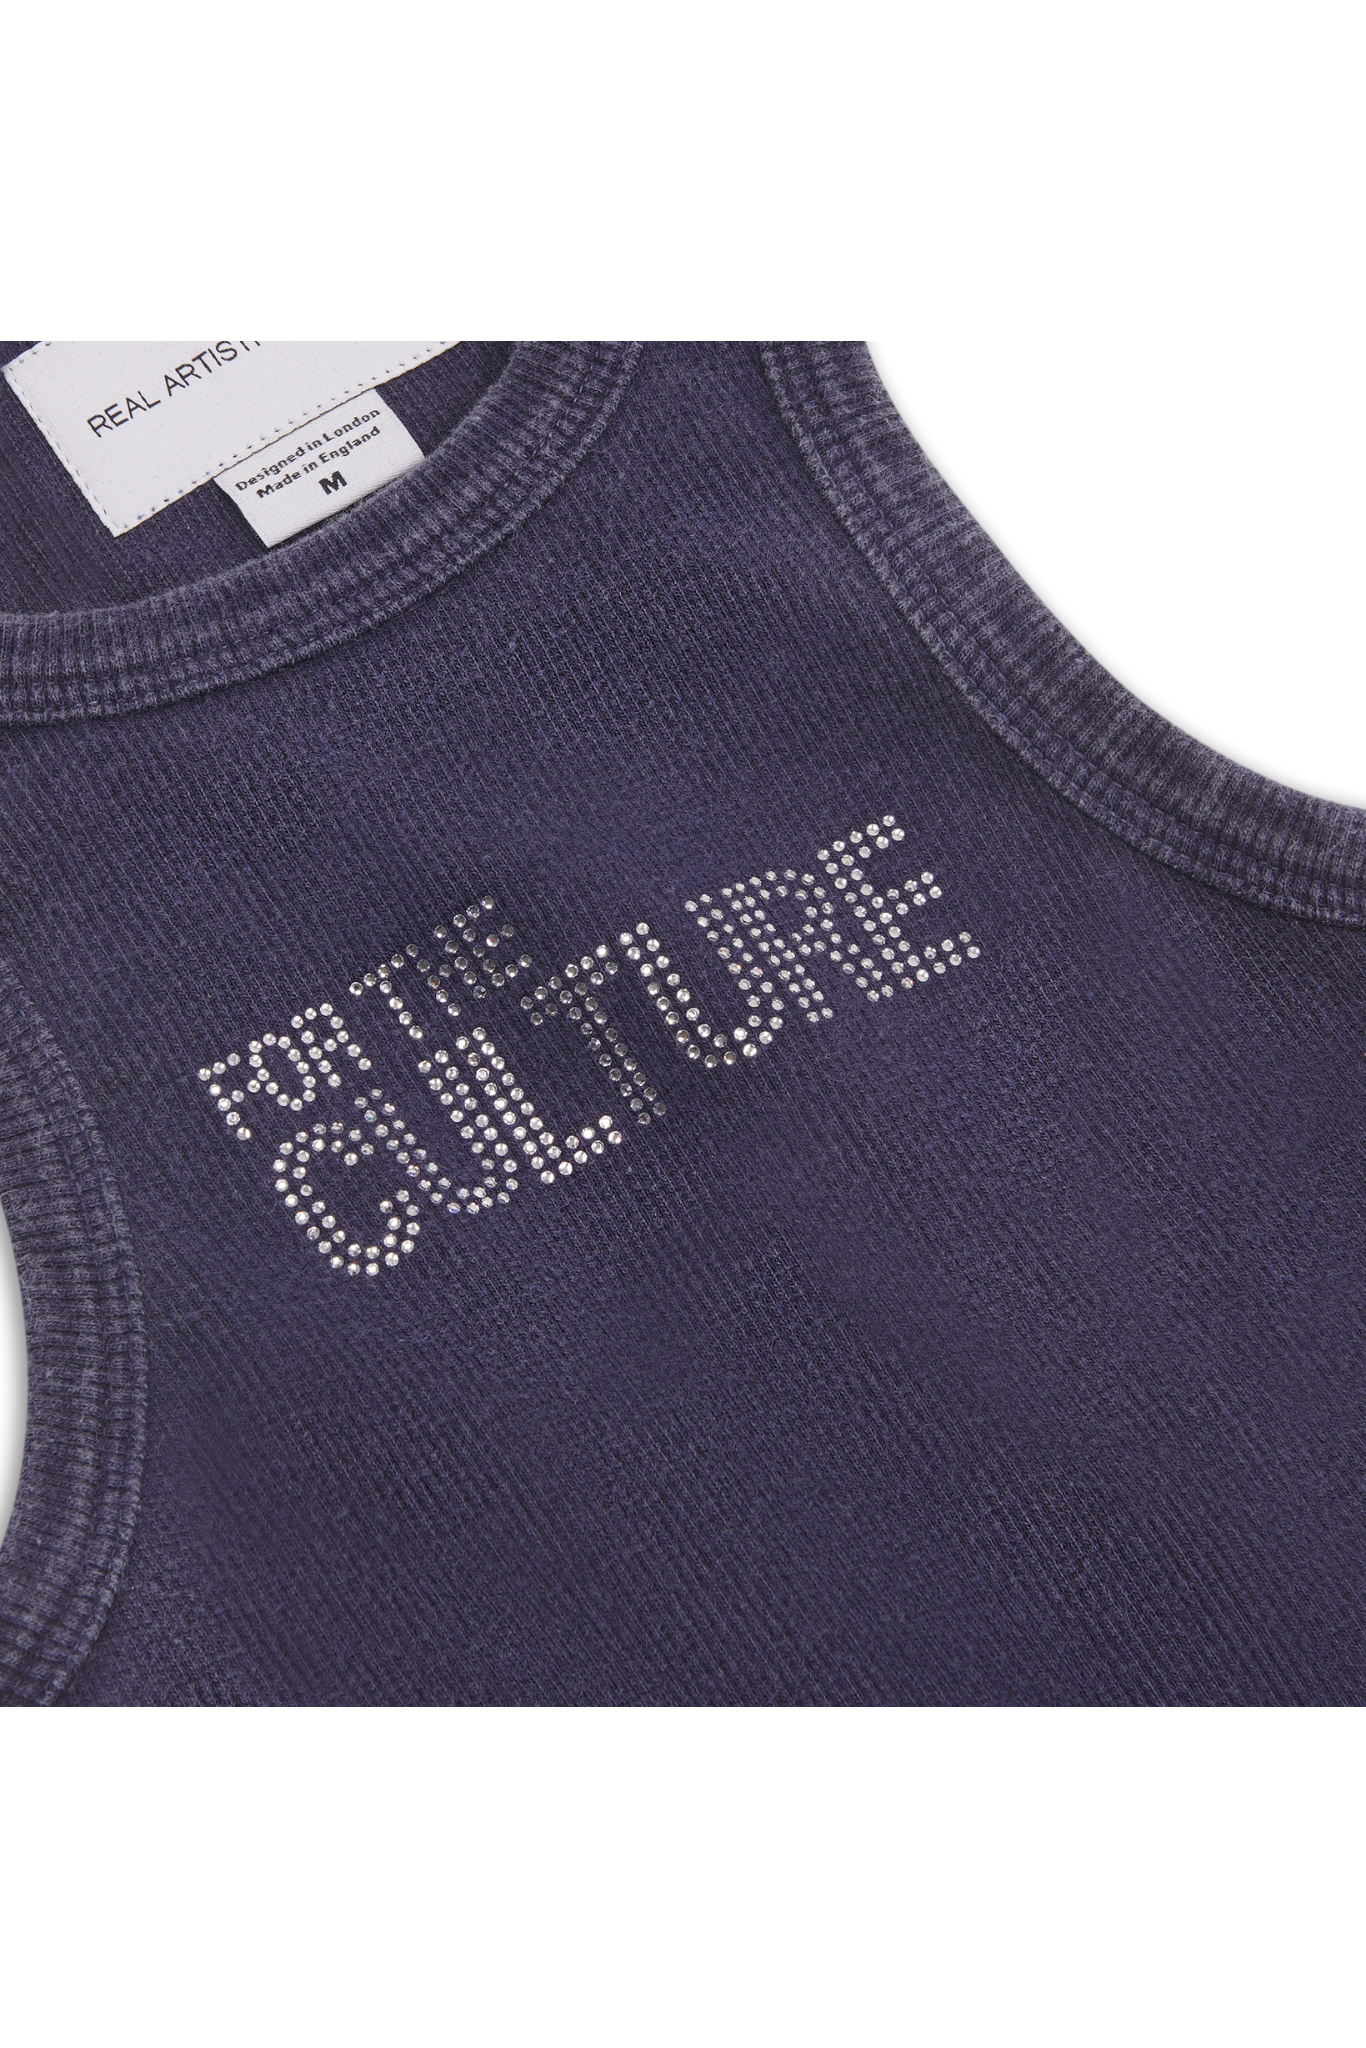 For The Culture Crystal Tank Top - Navy Blue